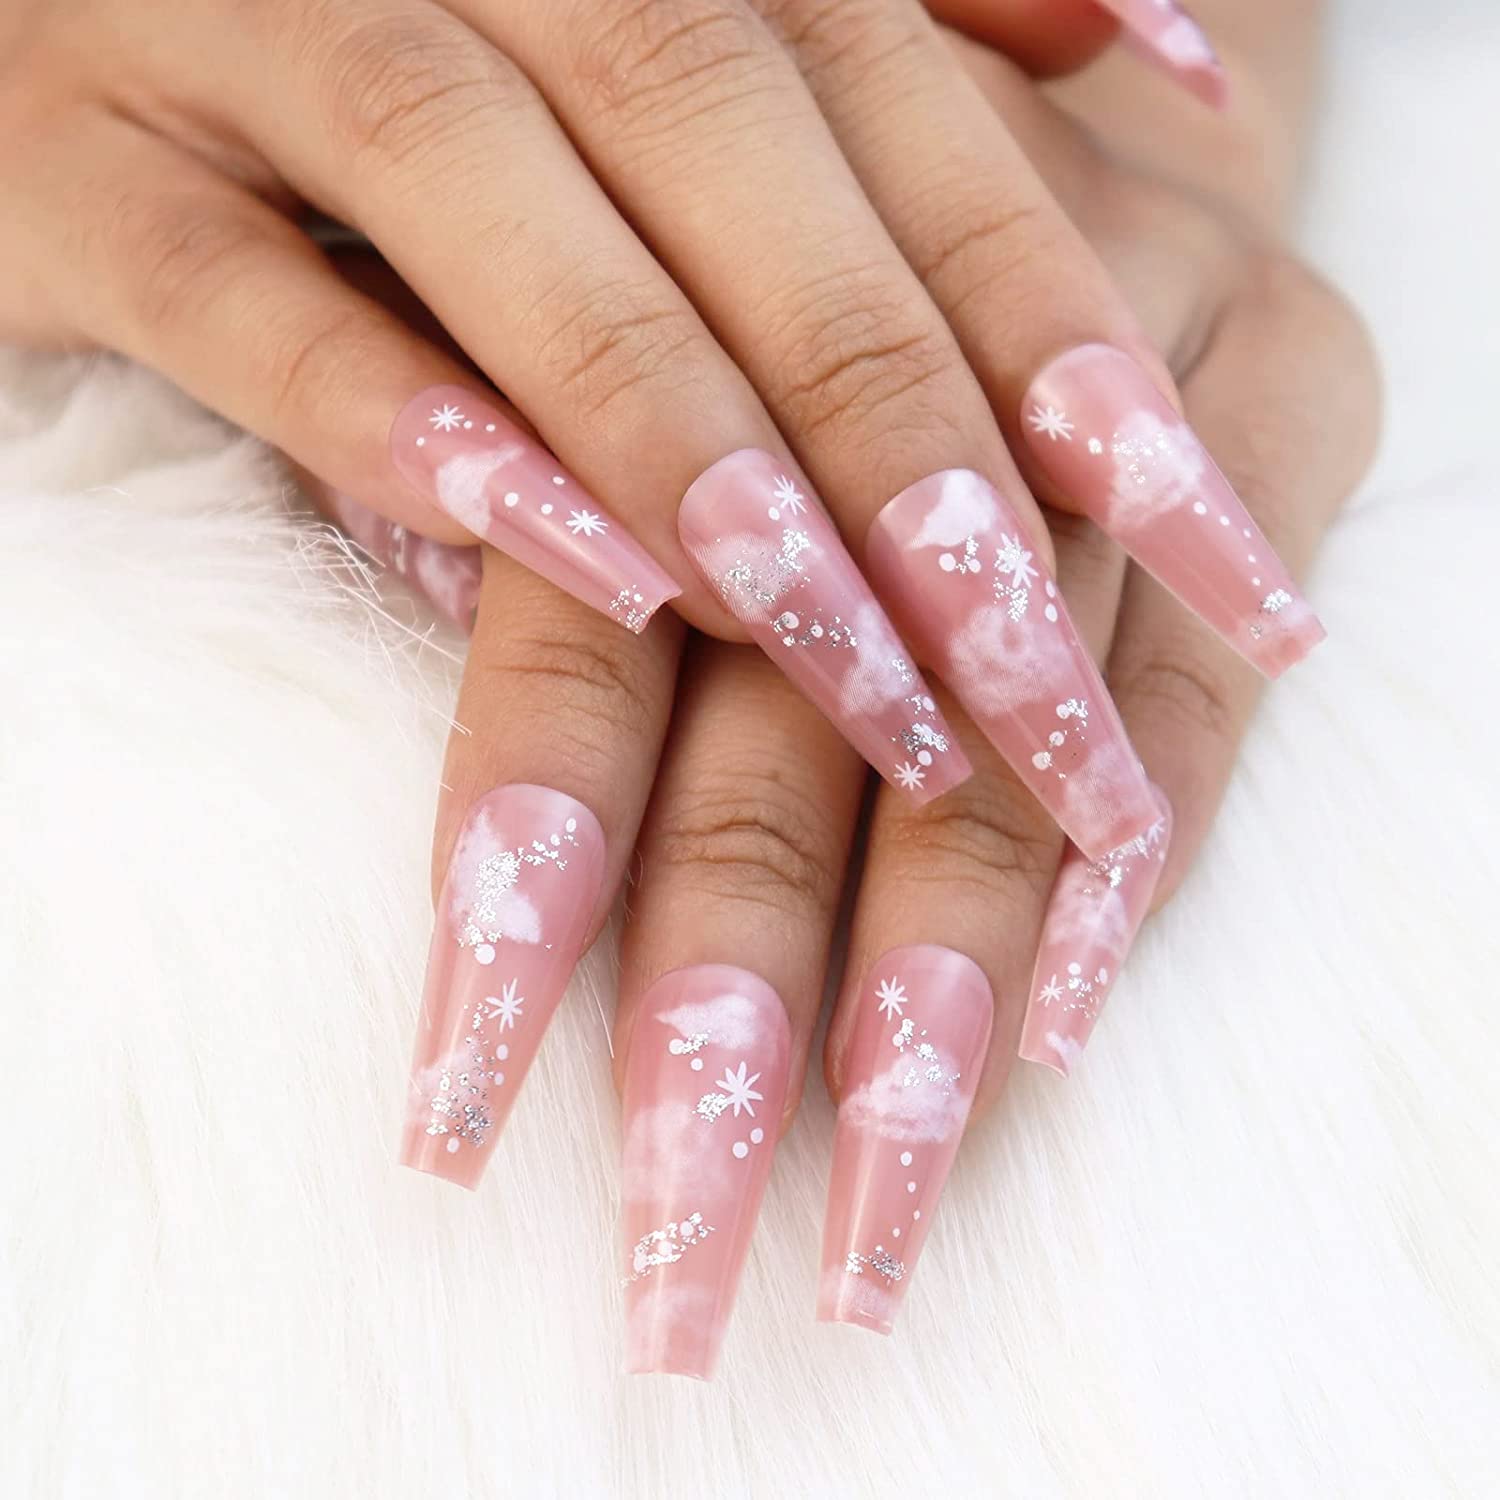 BABALAL Medium Press on Nails Gradient Pink Acrylic Fake Nails Cute Stick on Nails Ballerina False Tips Manicure with Design for Women and Girls